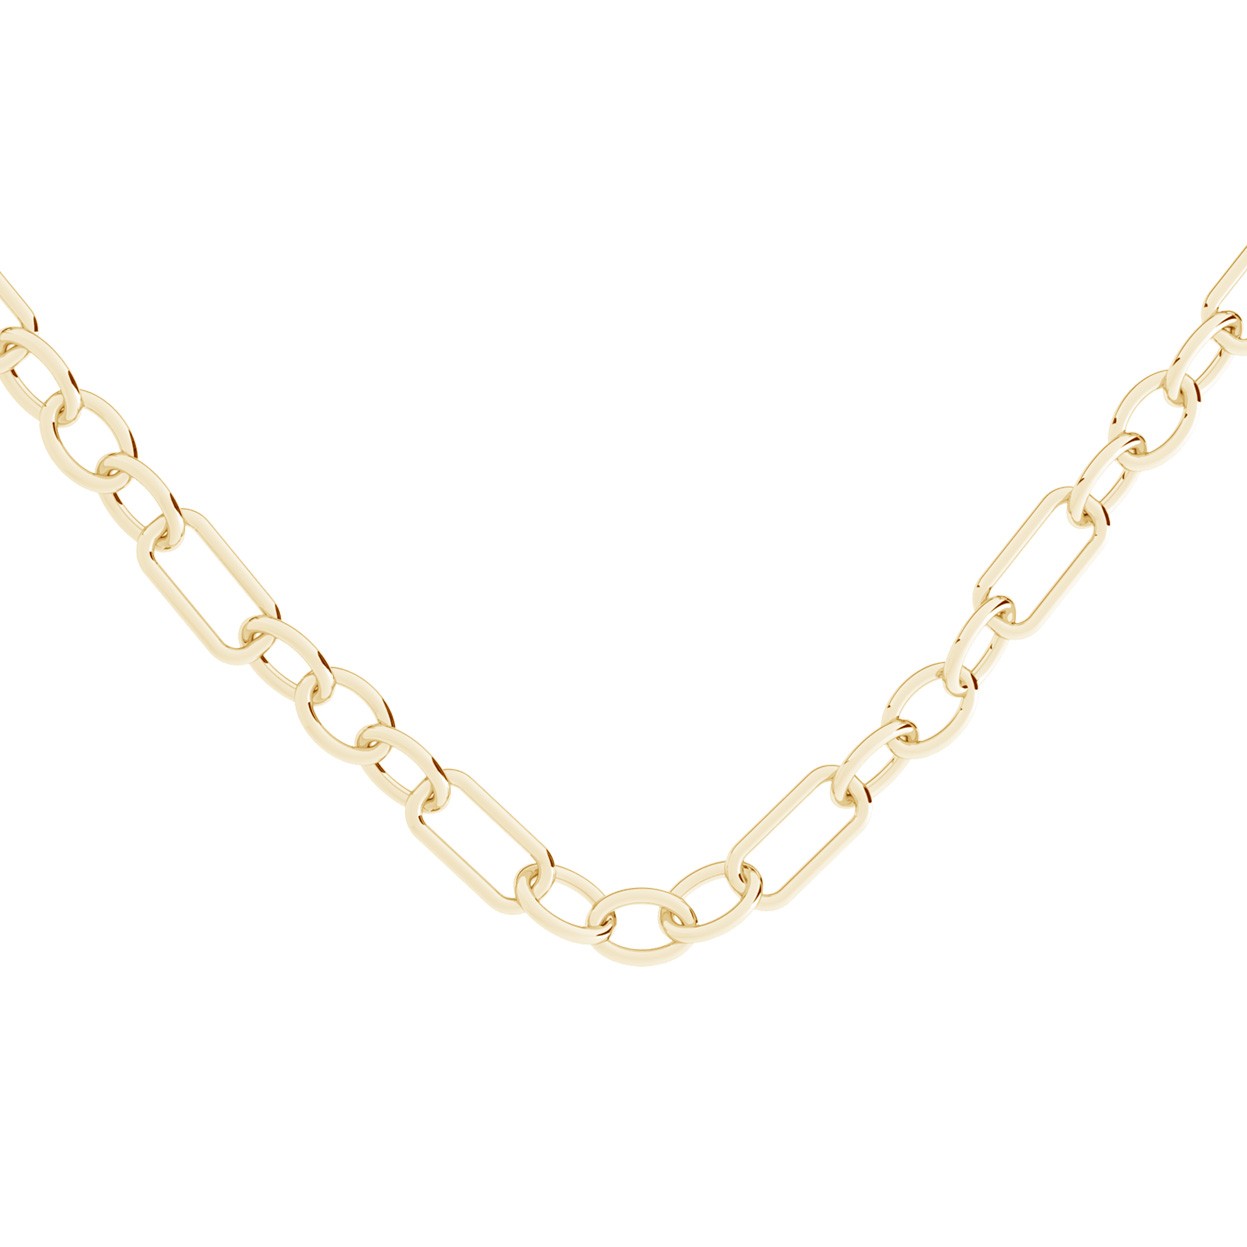 Mens chain anchor, Midas, Sky&Co, sterling silver 925